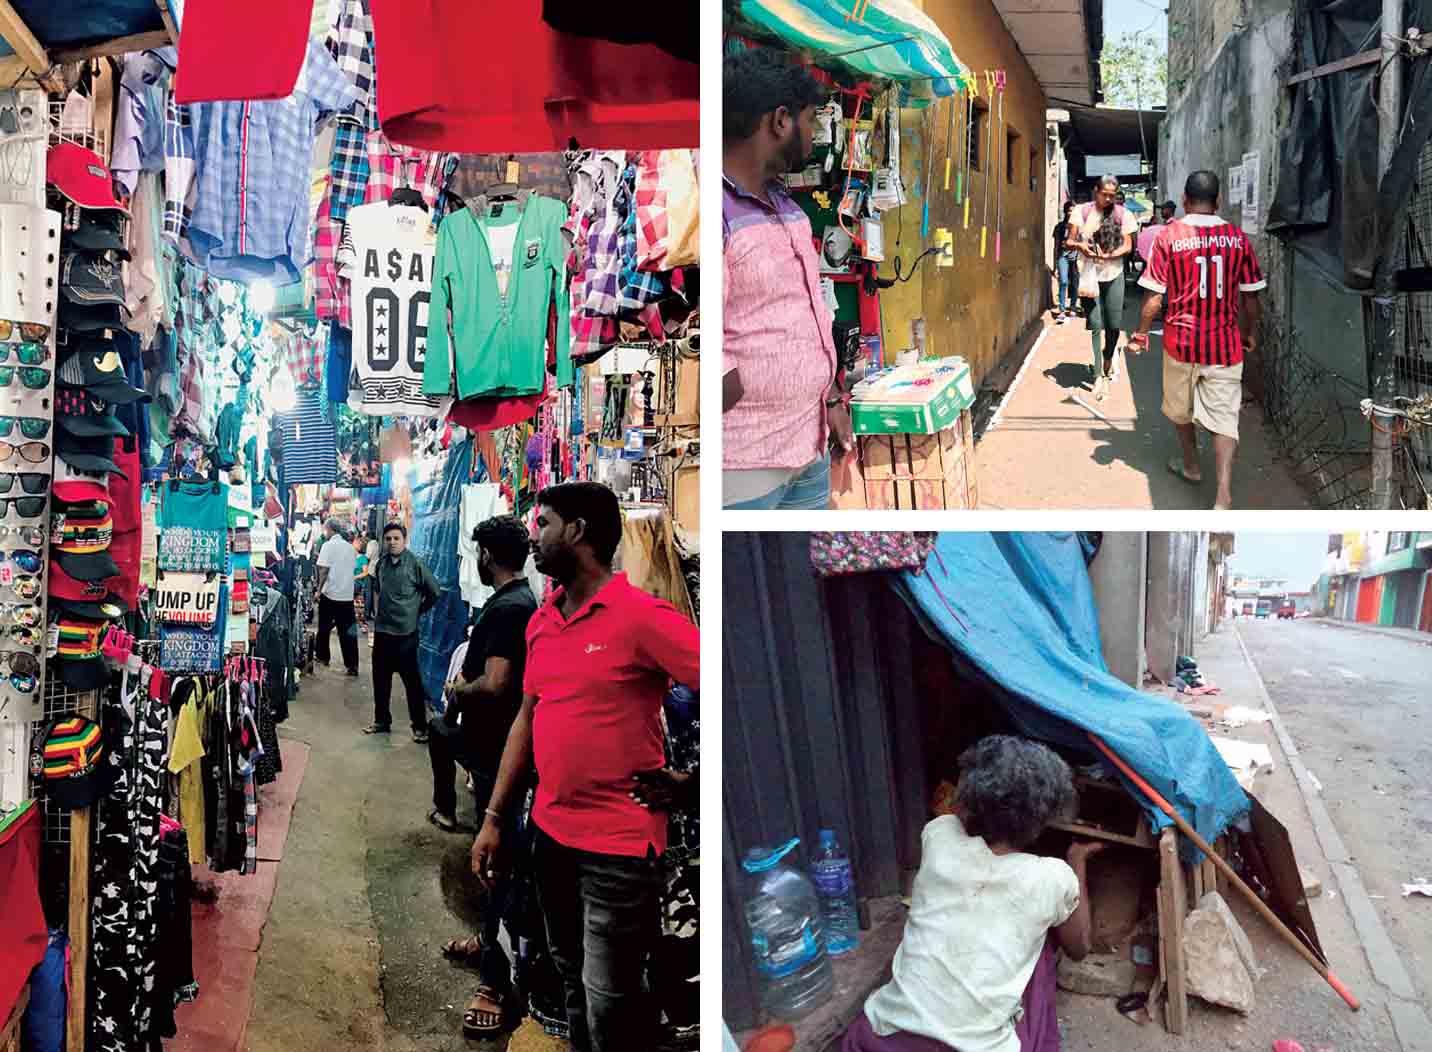 gendered-production-spaces-pettah-one-cross-streets-friday-morning-bogaha-handiya-inside-fose-market-man-staring-woman-walking-through-narrow-alleyway-small-shelter-set-up-near-store-front